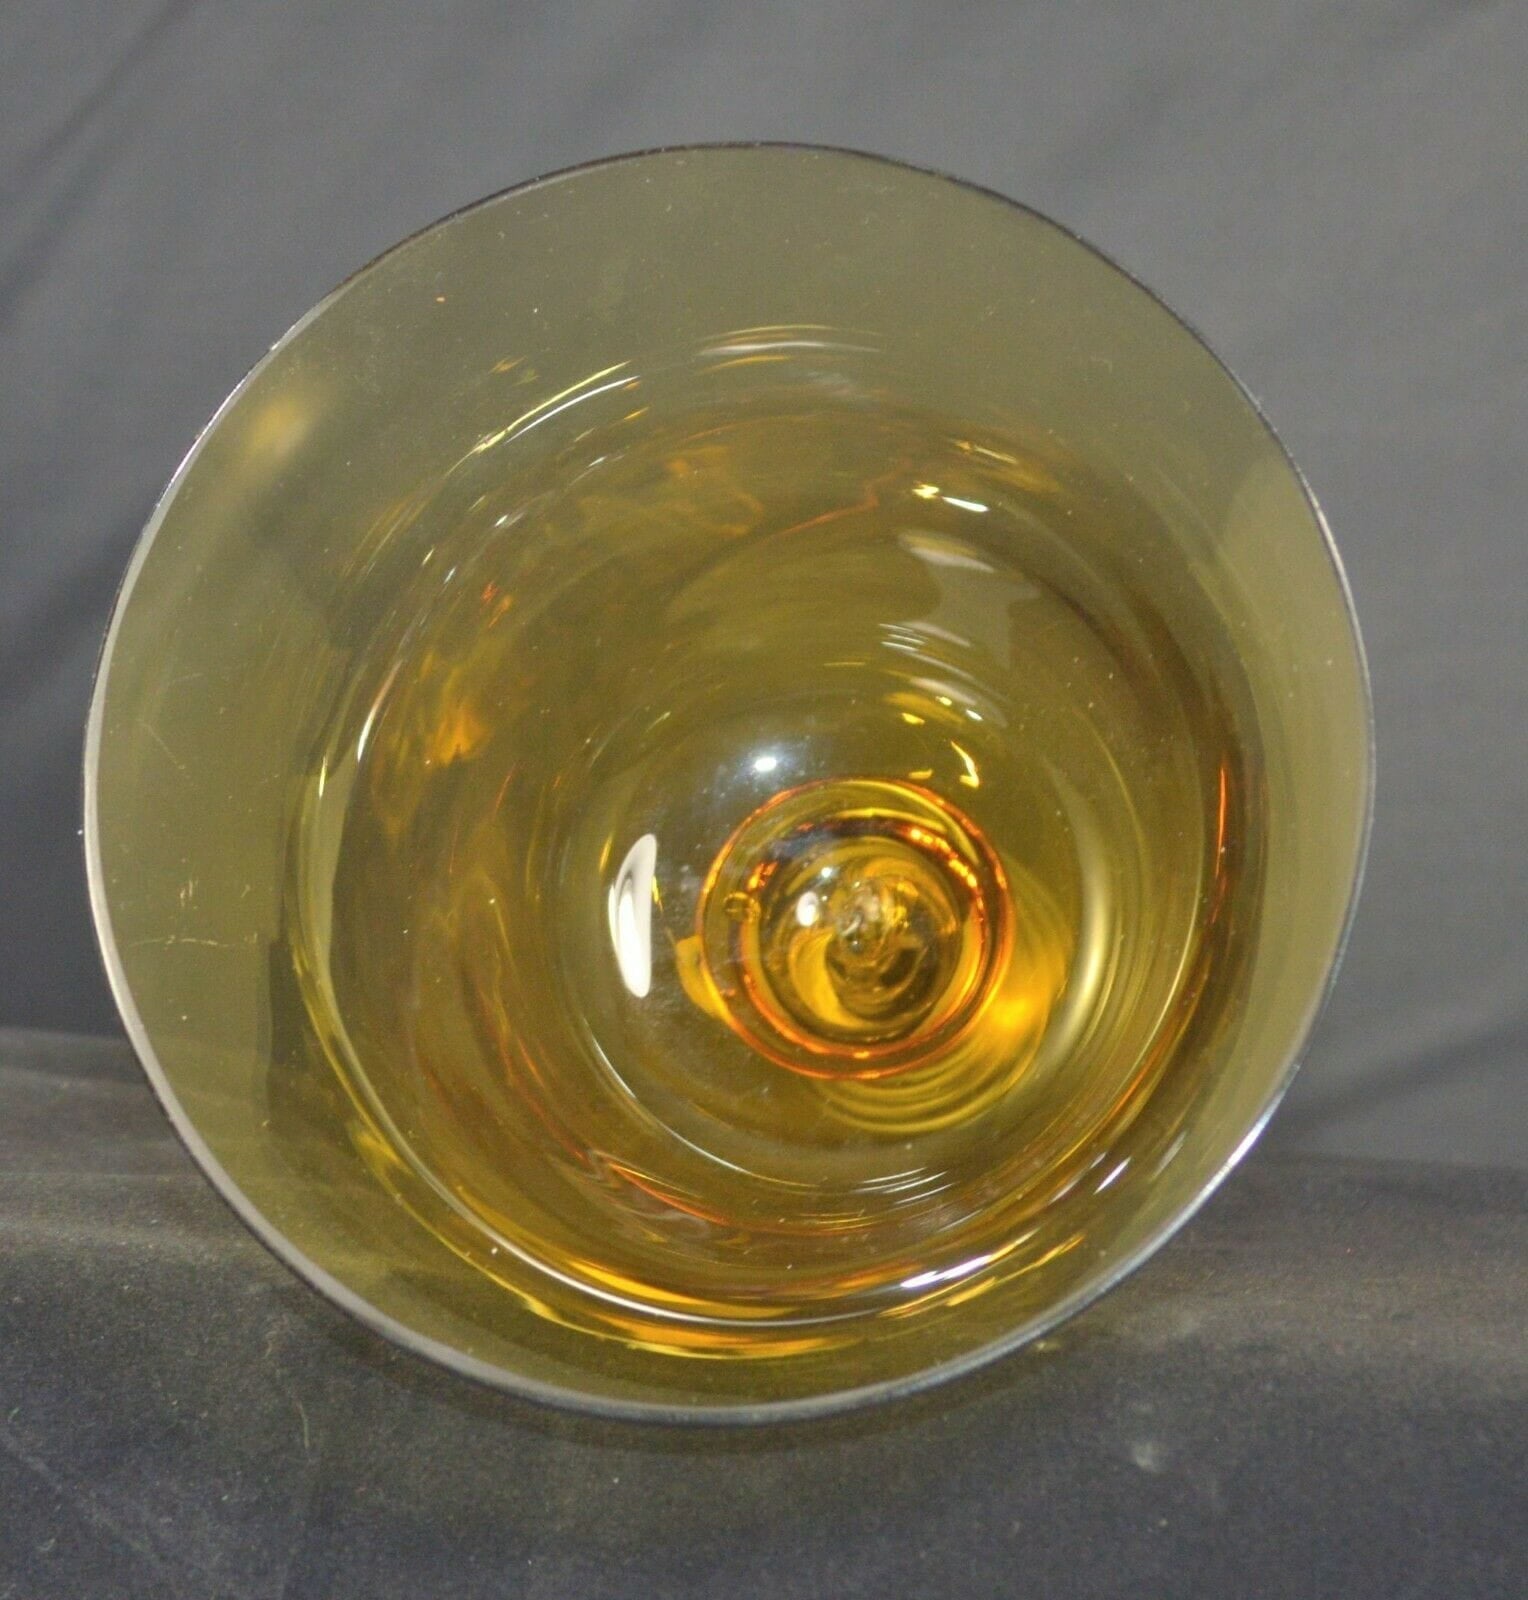 AMBER GLASS BELL(PREVIOUSLY OWNED NO CLANGER) GOOD CONDITION - TMD167207